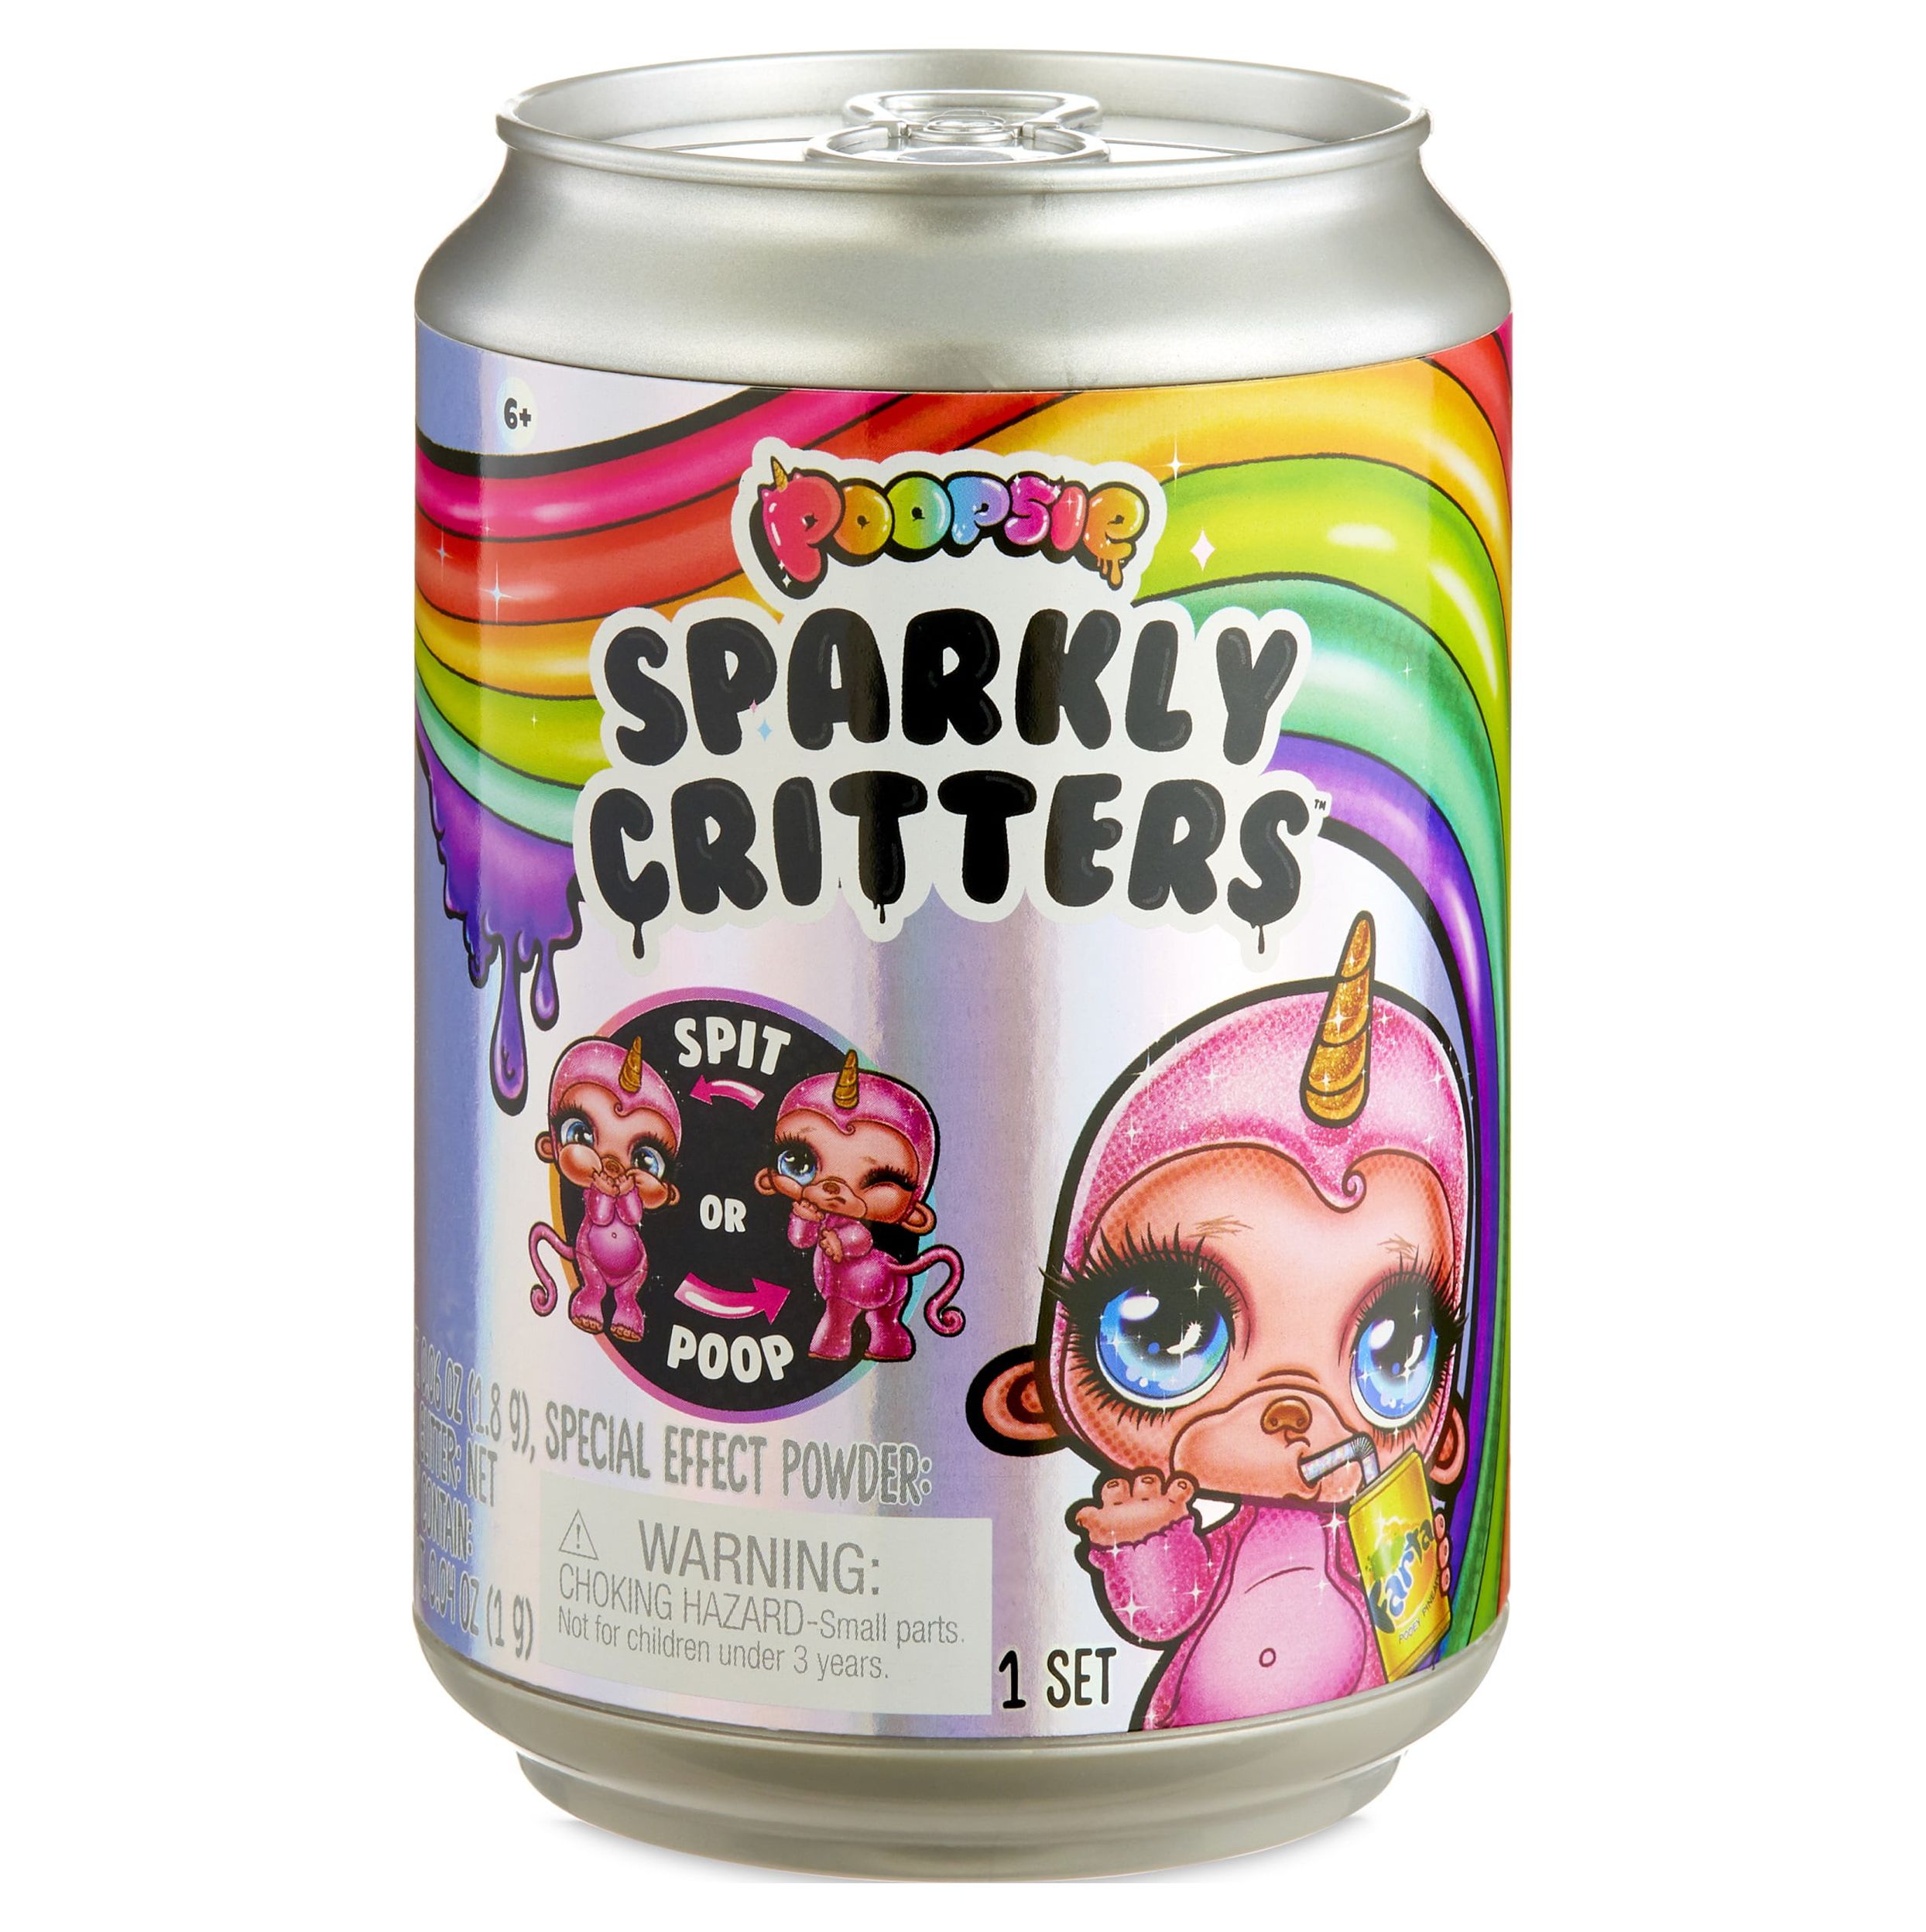 Poopsie Sparkly Critters 6" Figures That Magically Poop or Spit Slime - image 1 of 7